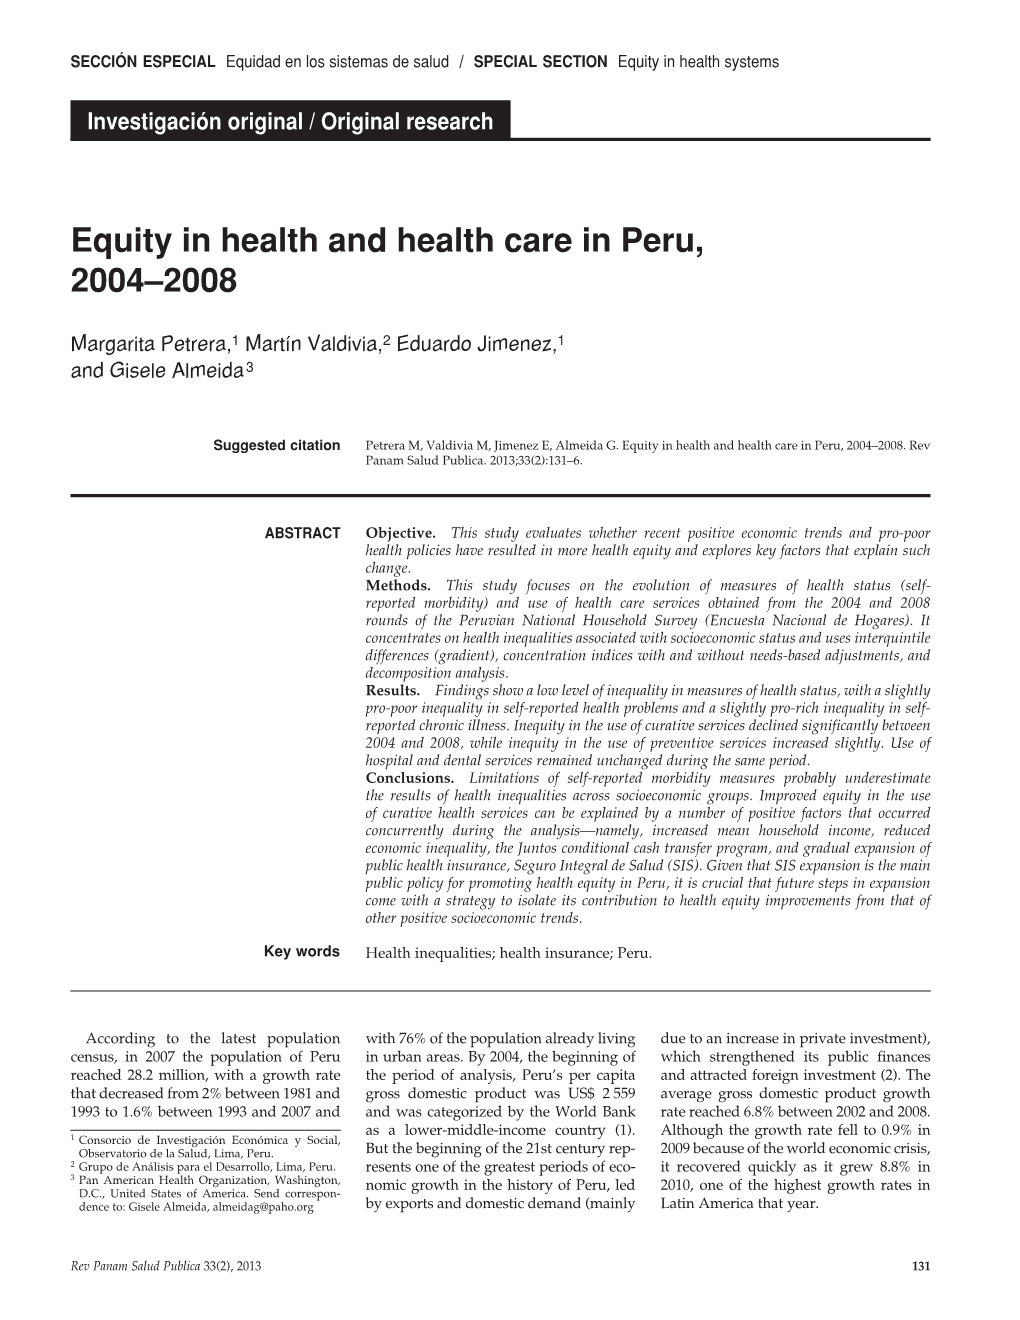 Equity in Health and Health Care in Peru, 2004–2008